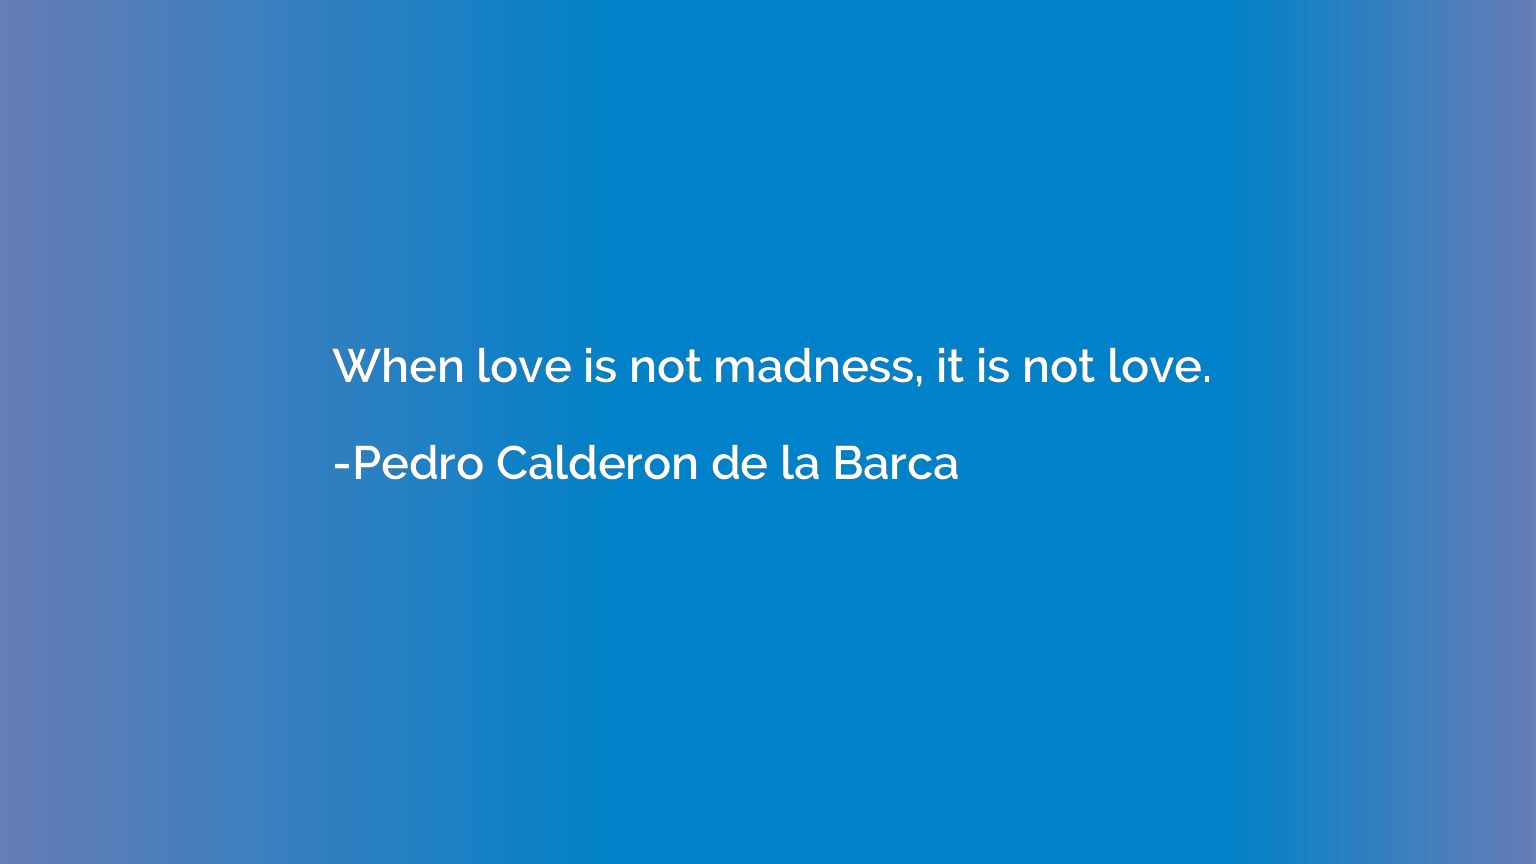 When love is not madness, it is not love.